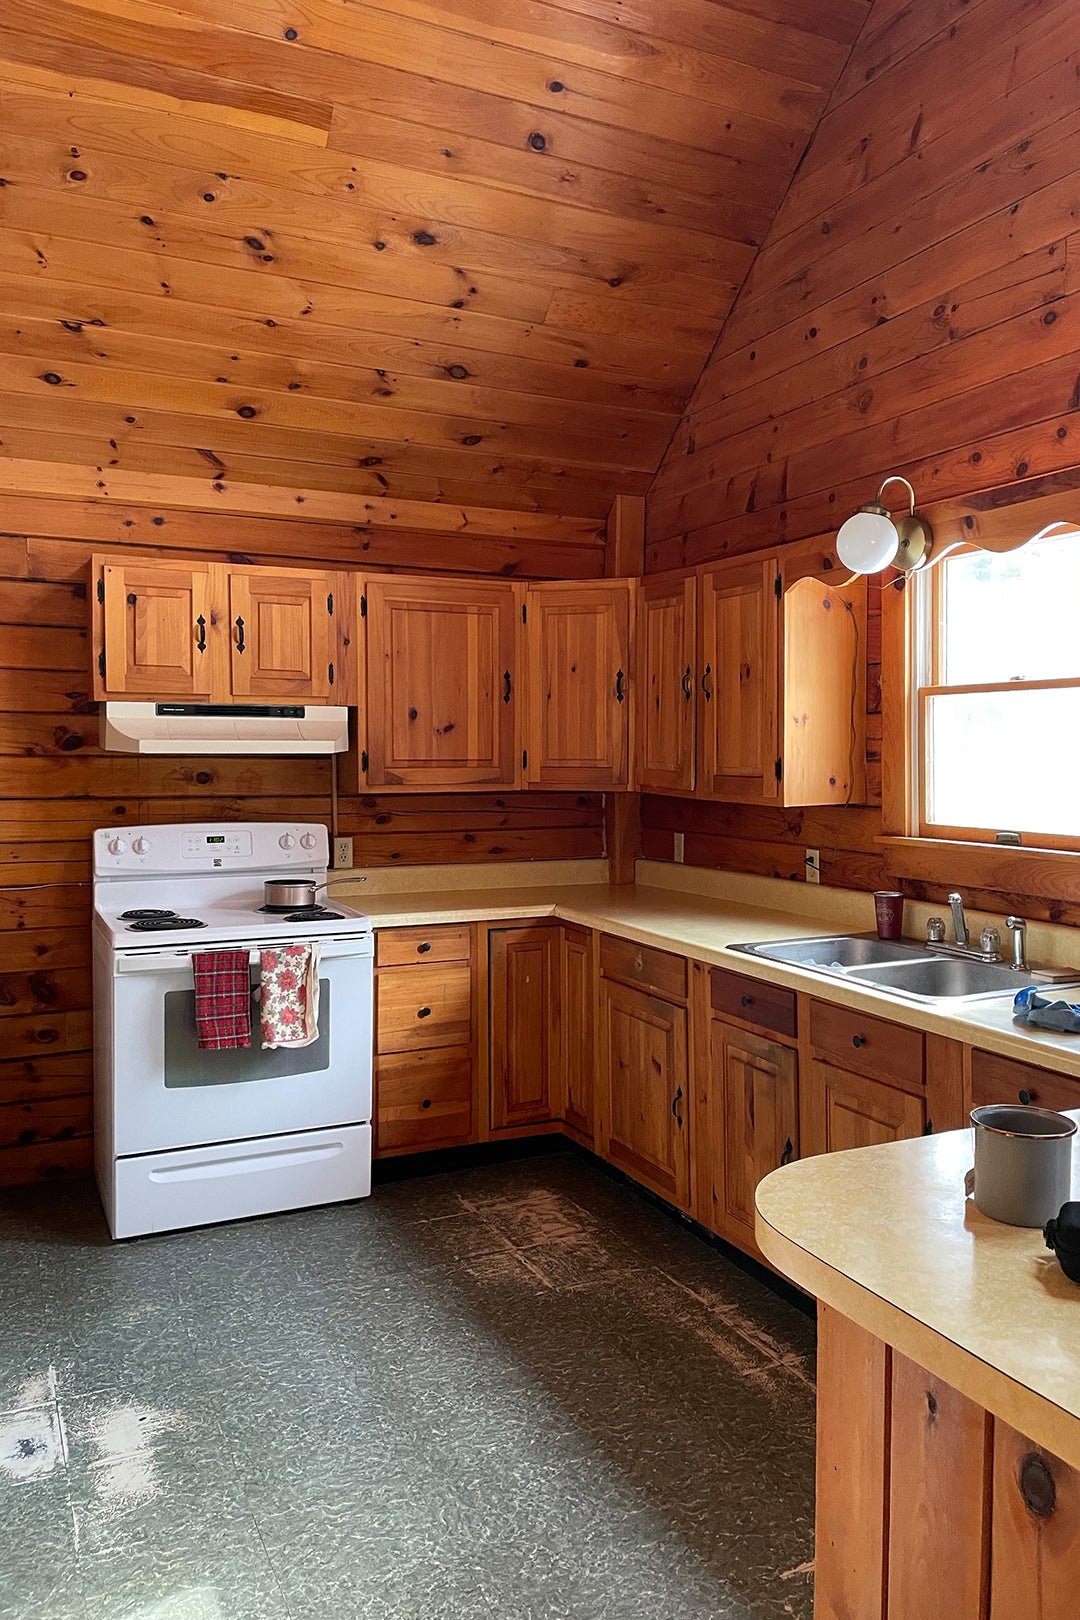 It Took 5,000 Square Feet of Wood Stain to De-Orangeify This Maine Cabin